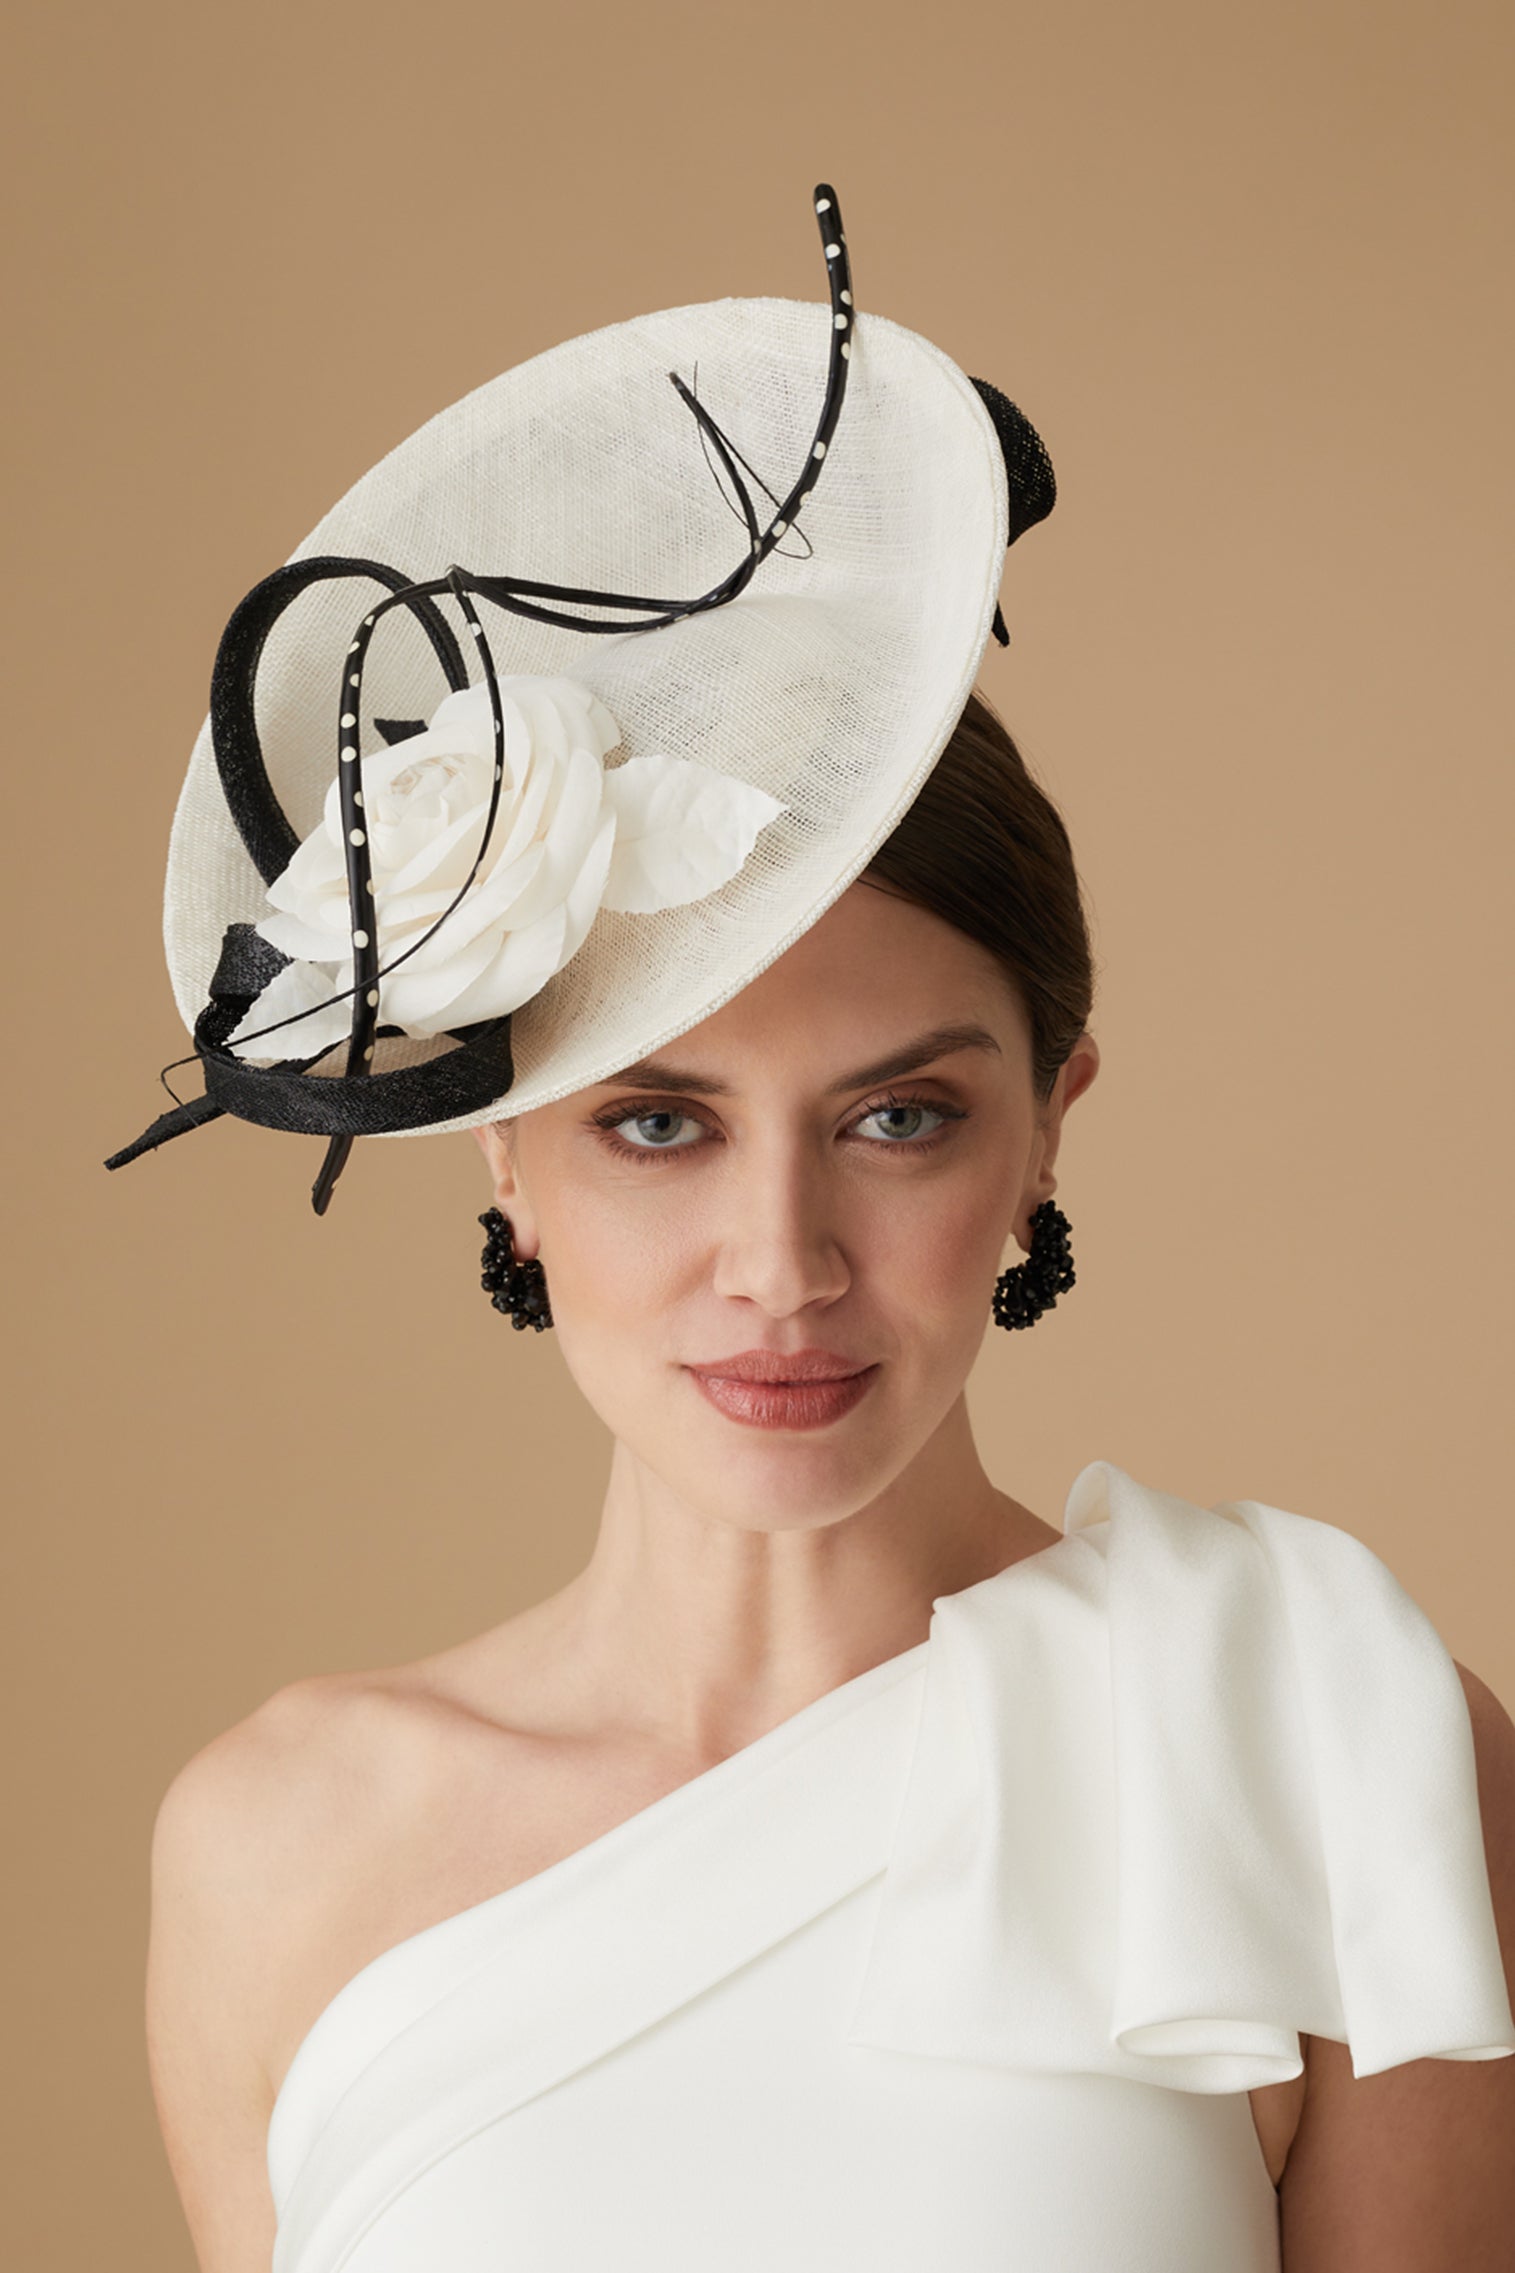 Assam White and Black Saucer Hat - Royal Ascot Hats - Lock & Co. Hatters London UK